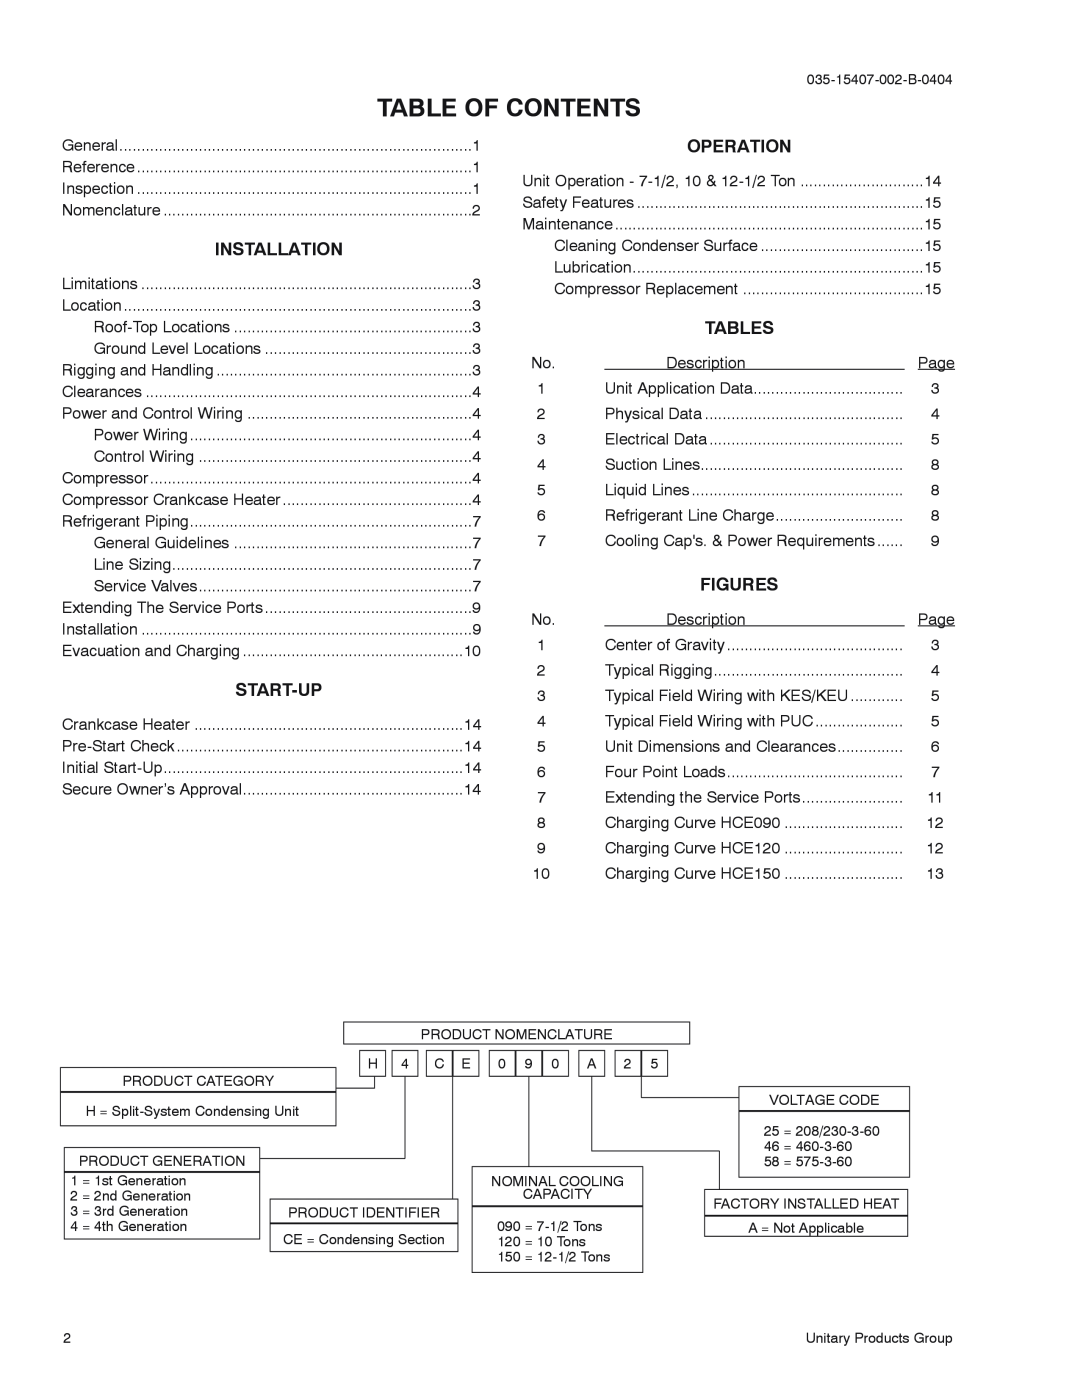 York H5CE090, H3CE120, H1CE150 installation manual Table Of Contents, Installation, Start-Up, Operation, Tables, Figures 